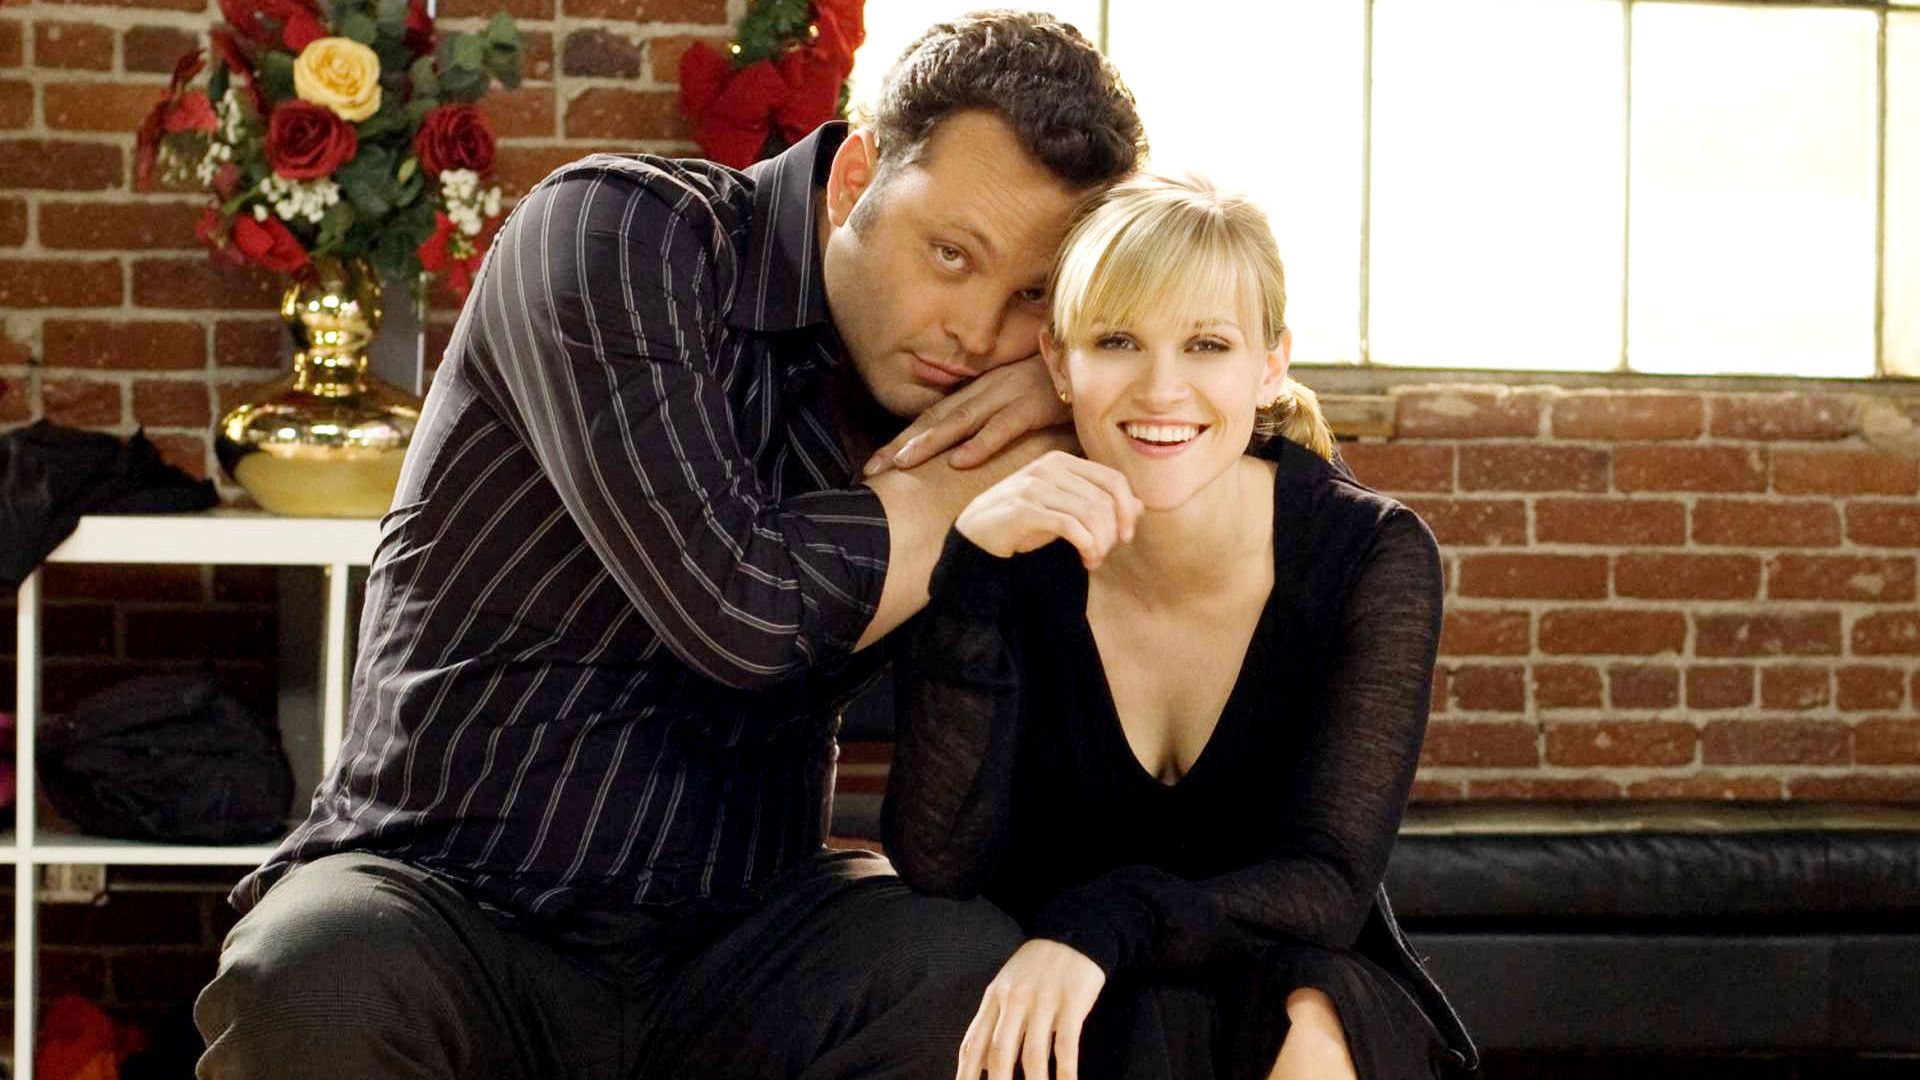 Four Christmases background